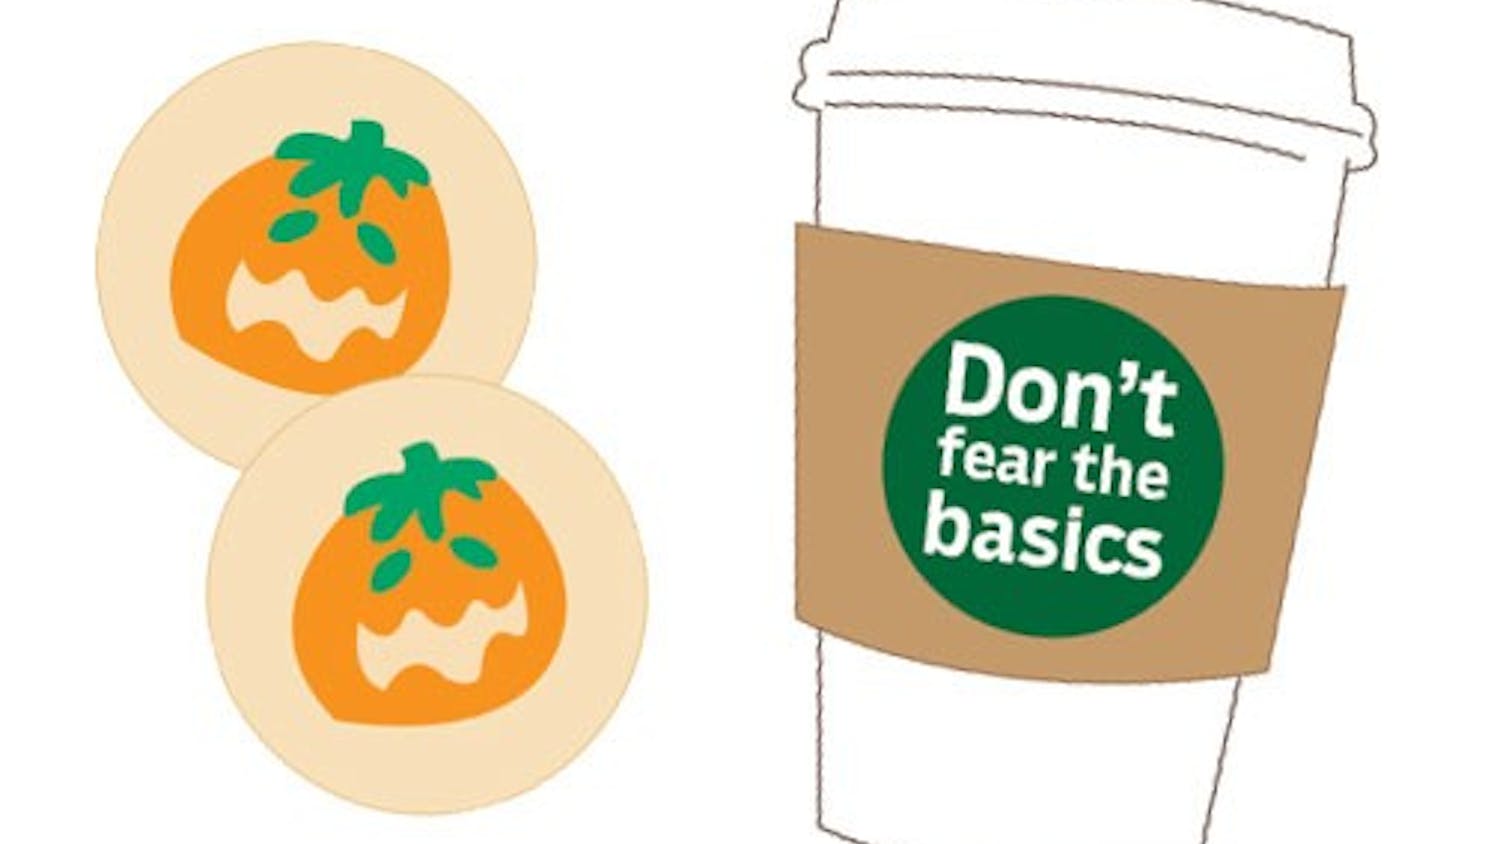 As the weather cools, the potential to be basic increases. But think twice before you criticize someone for enjoying their pumpkin spice latte.